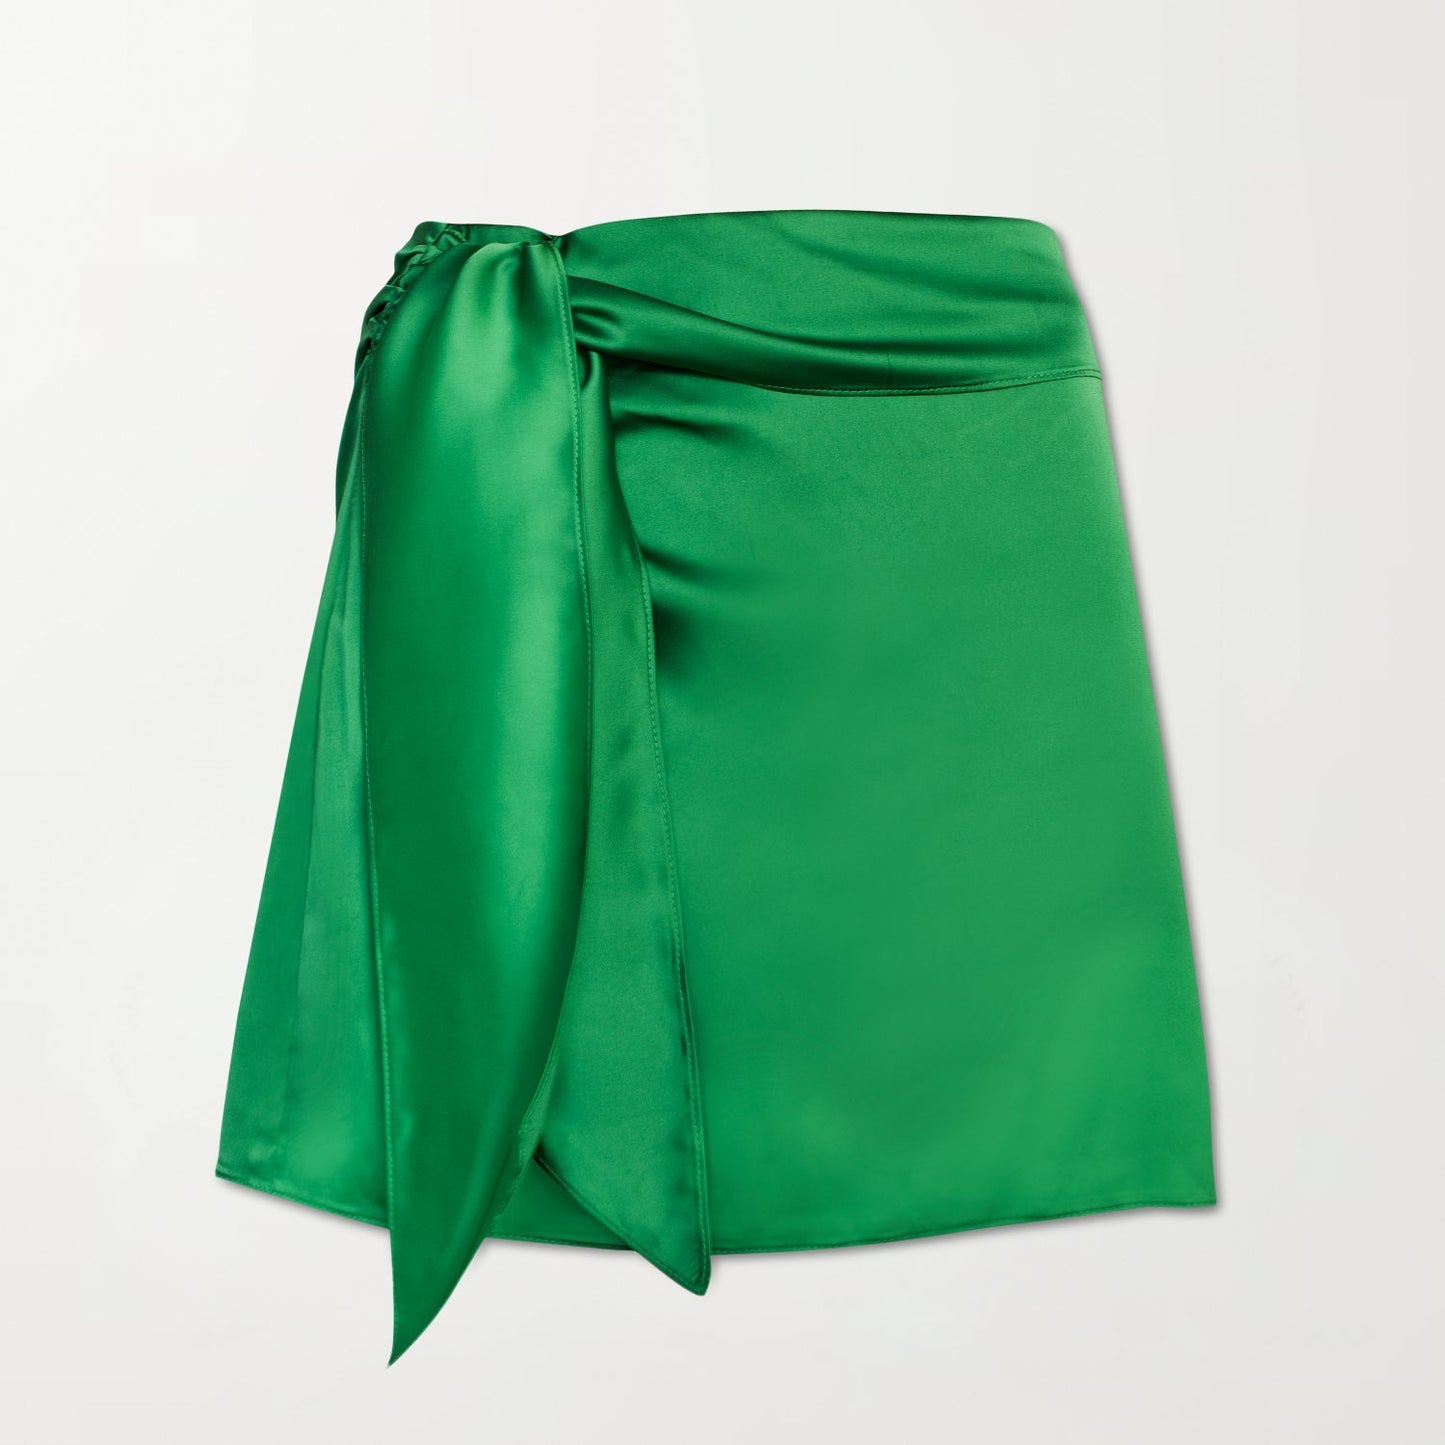 The St. Tropez Skirt in Emerald